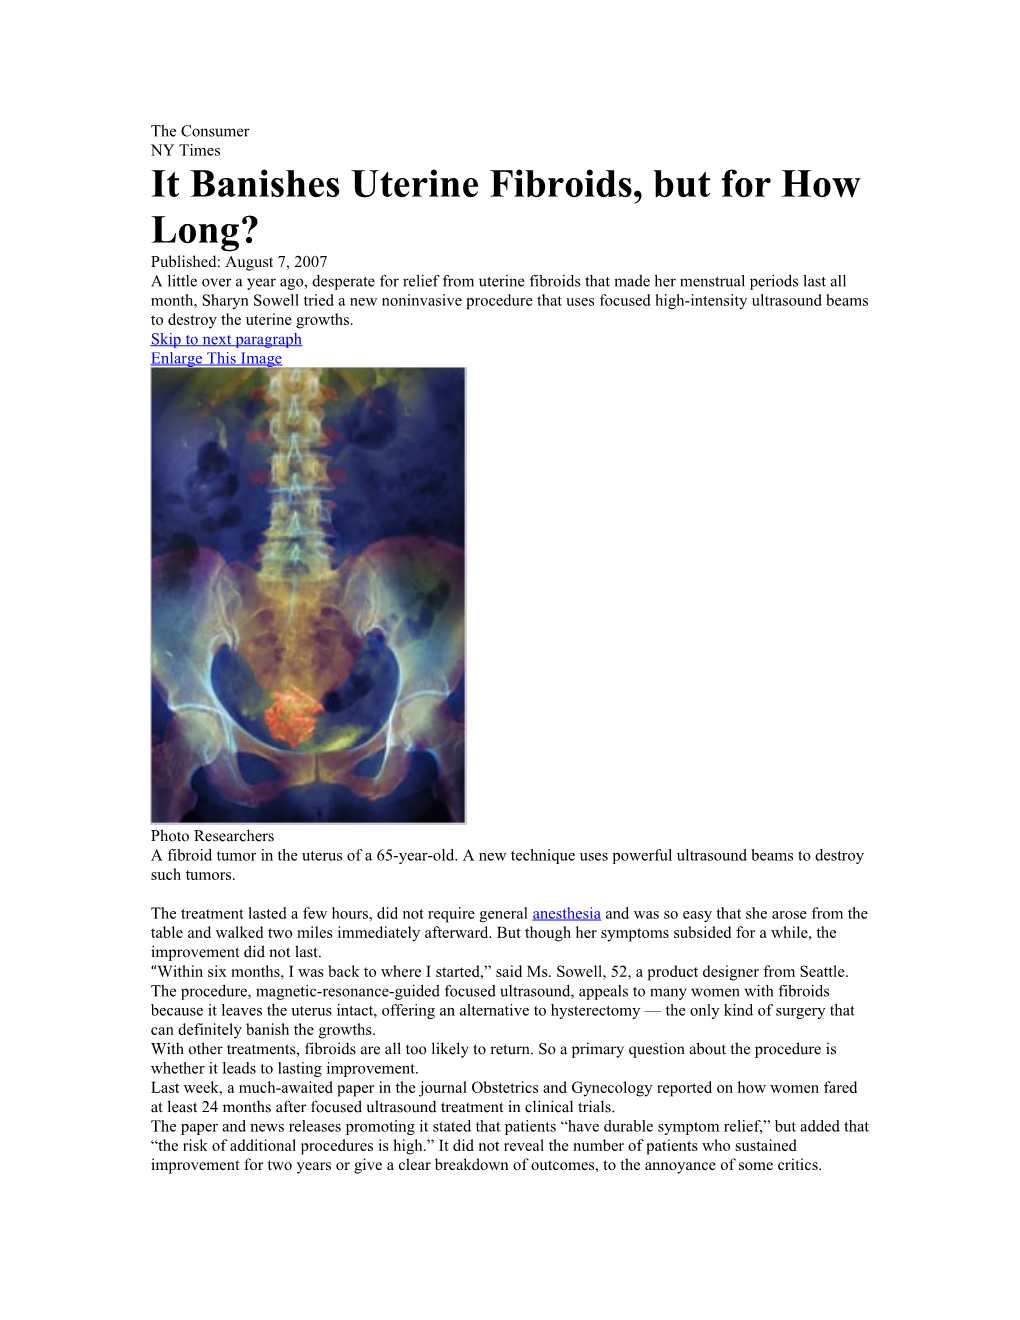 It Banishes Uterine Fibroids, but for How Long?